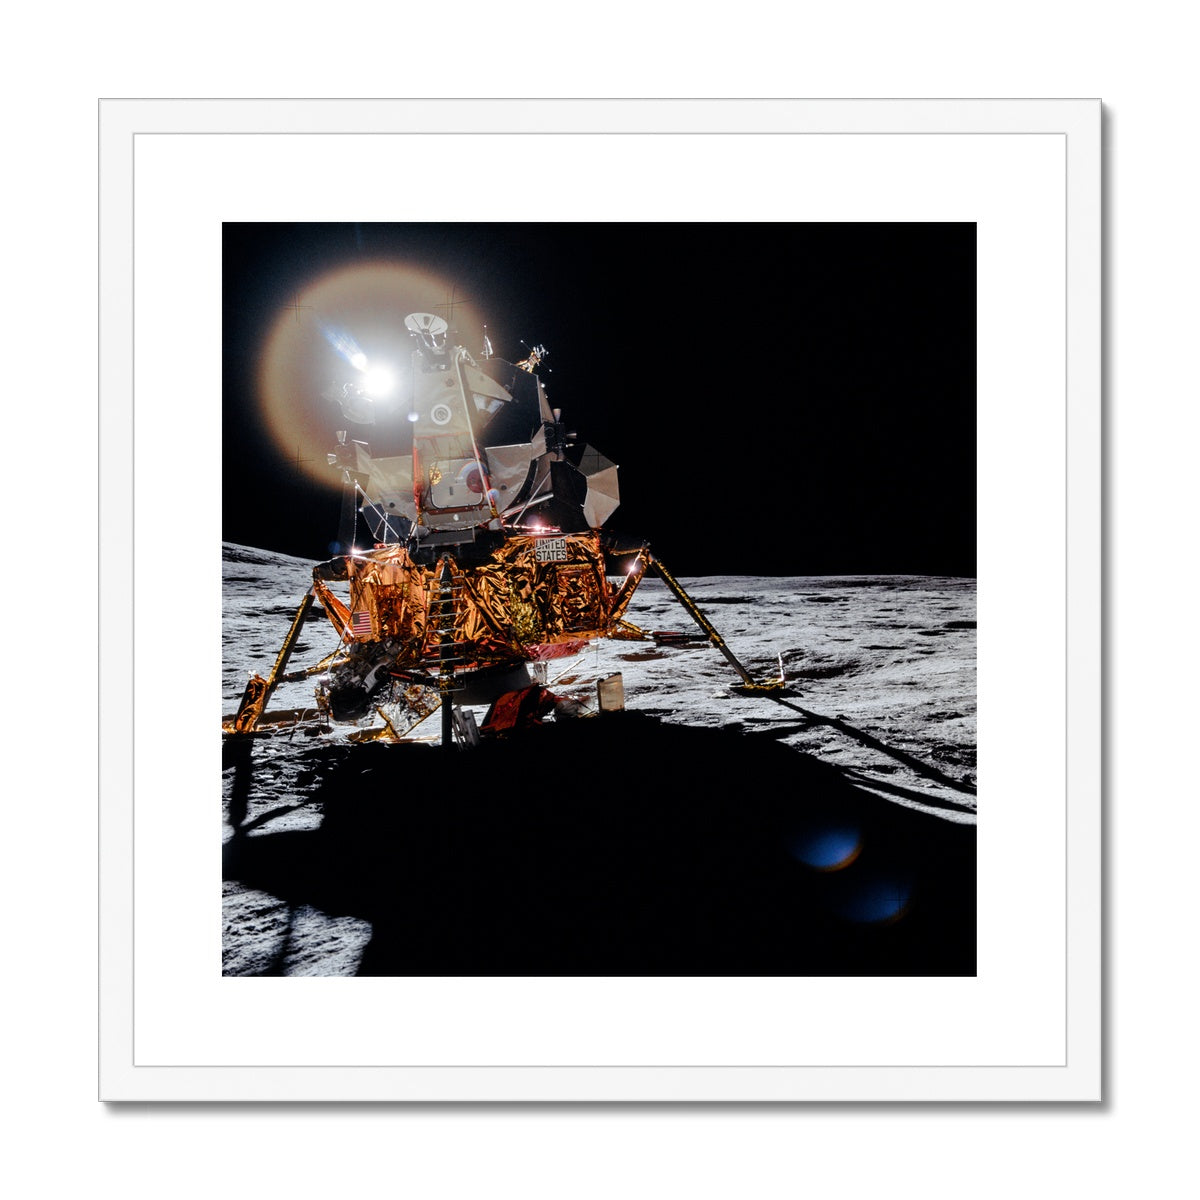 Antares' Flame Framed & Mounted Print